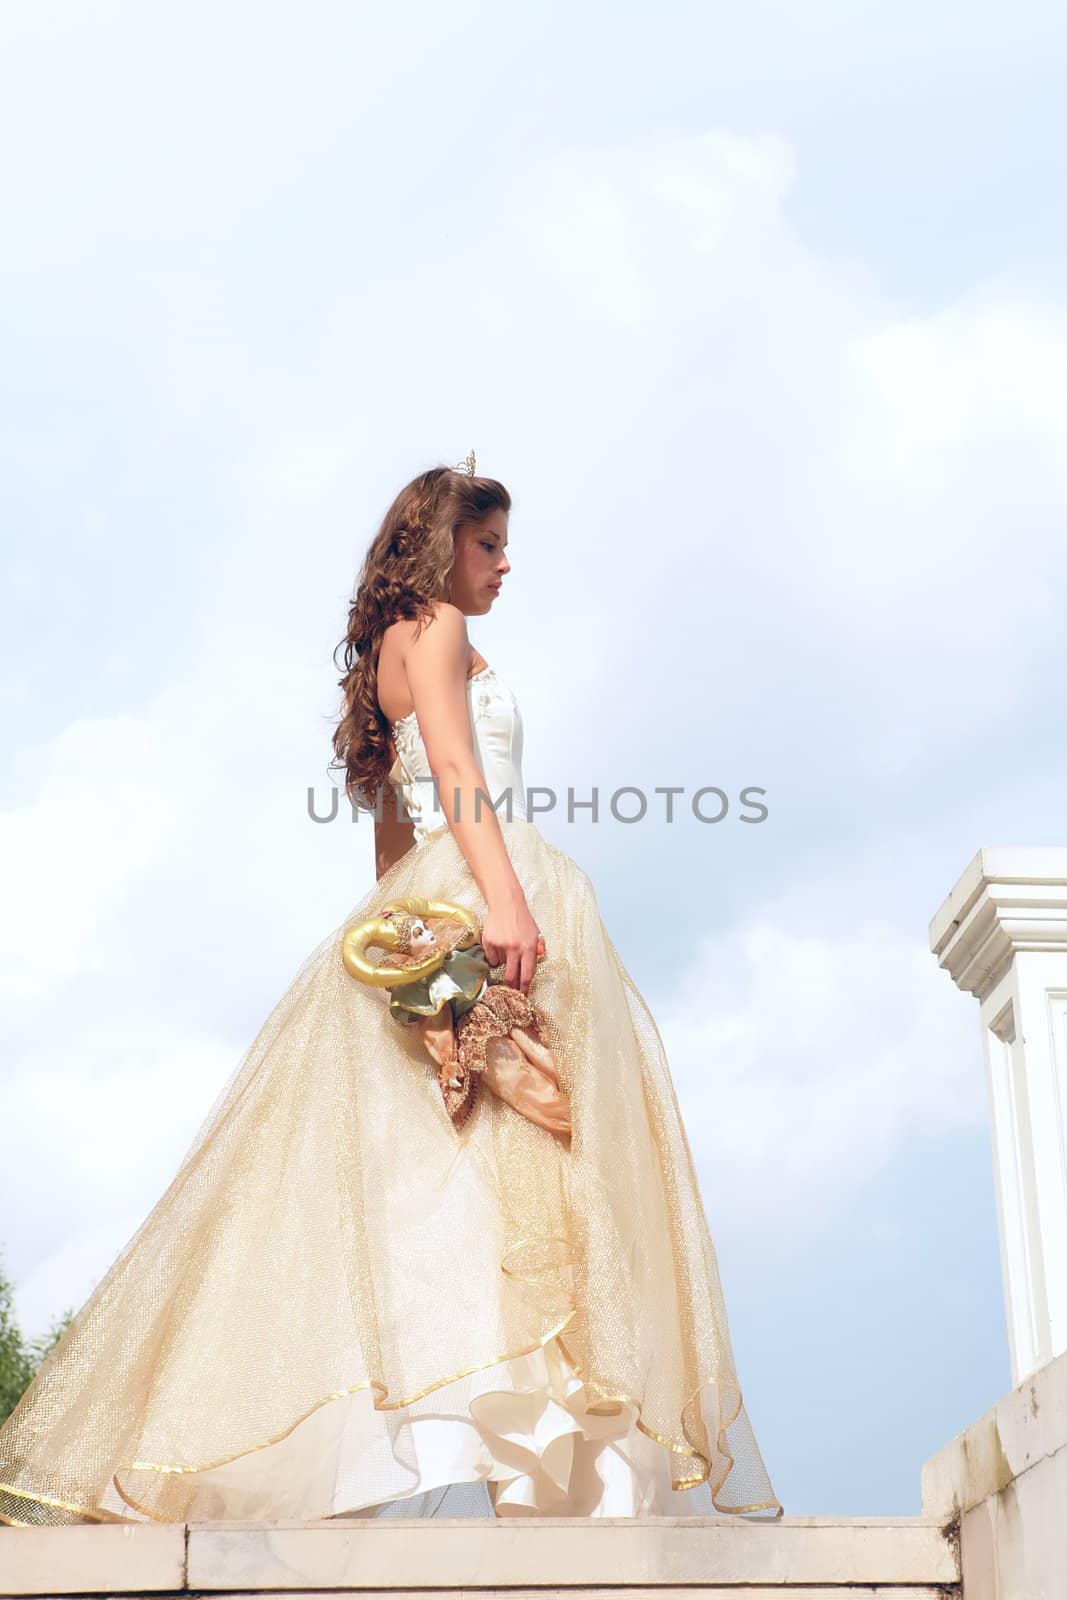 princess in white-golden gown with old loved toy on cloudscape